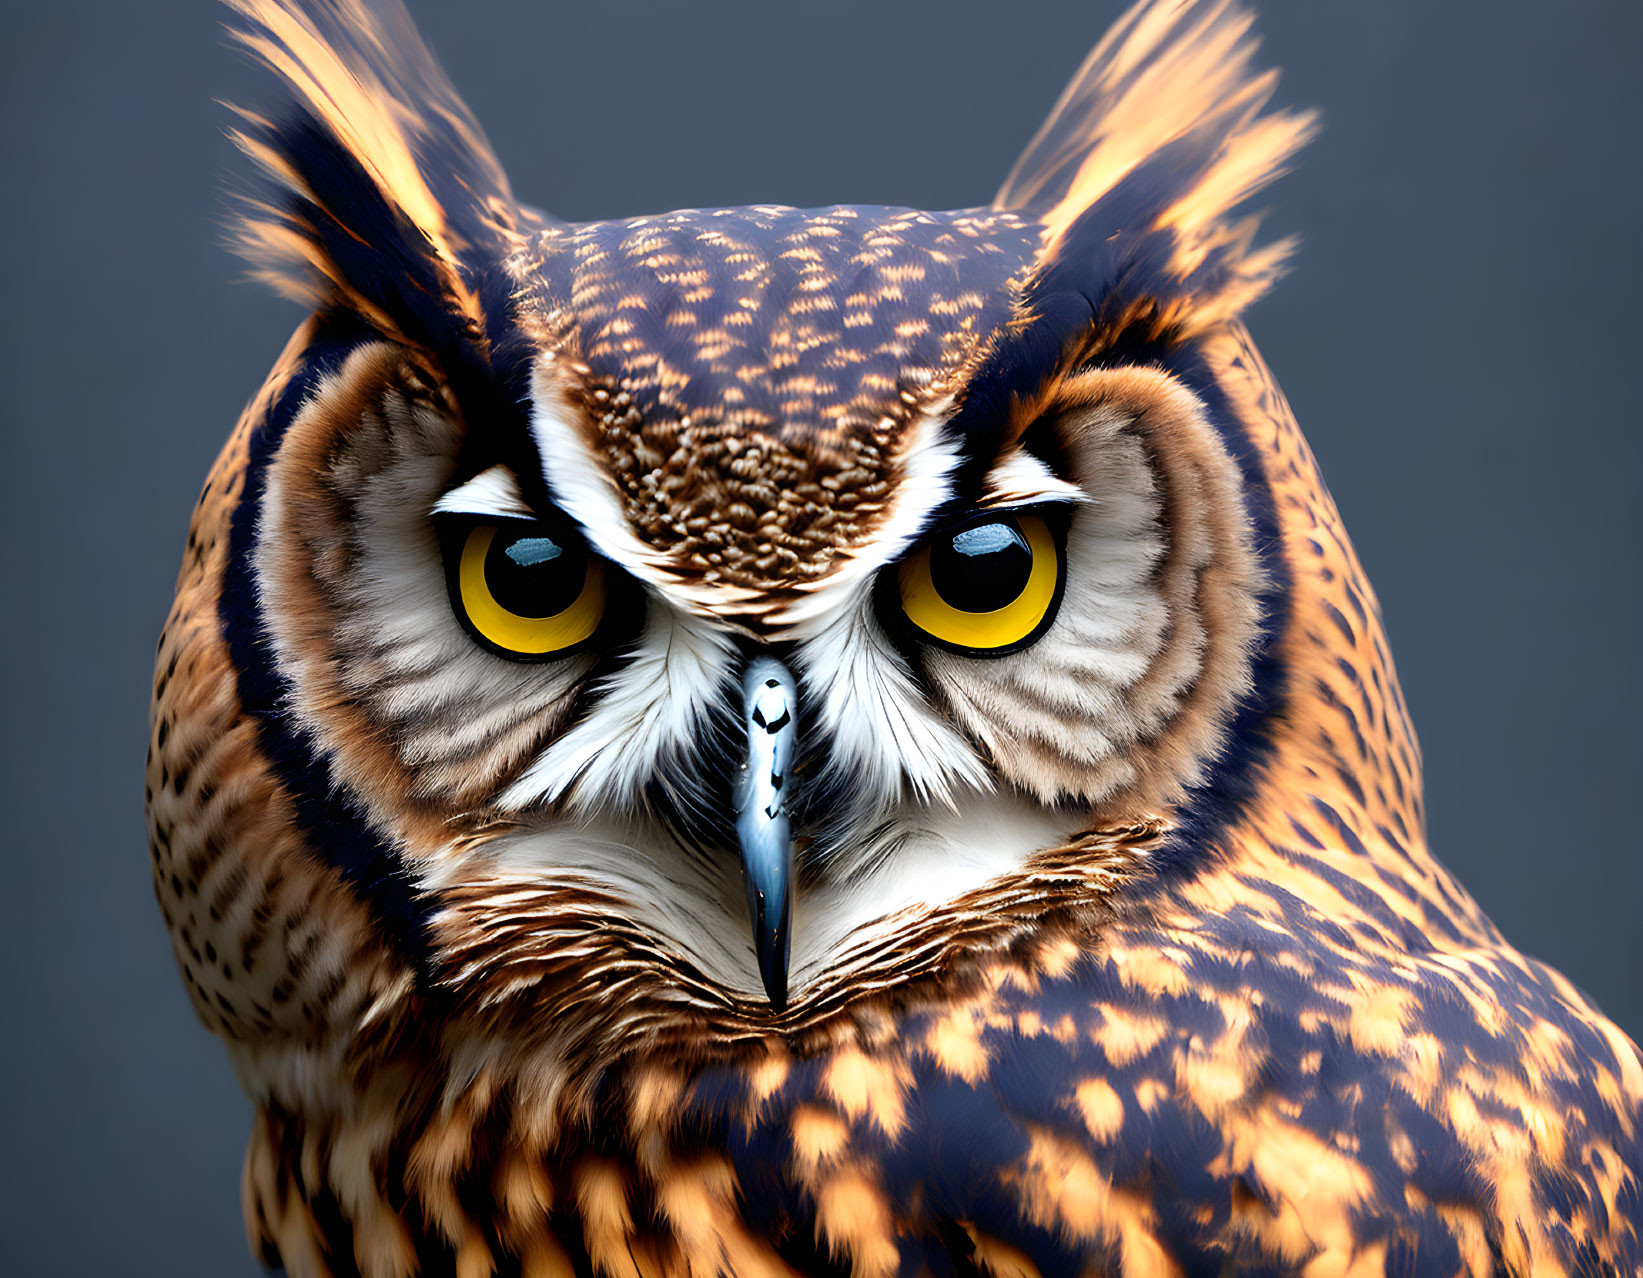 Detailed Close-Up of Great Horned Owl with Prominent Ear Tufts